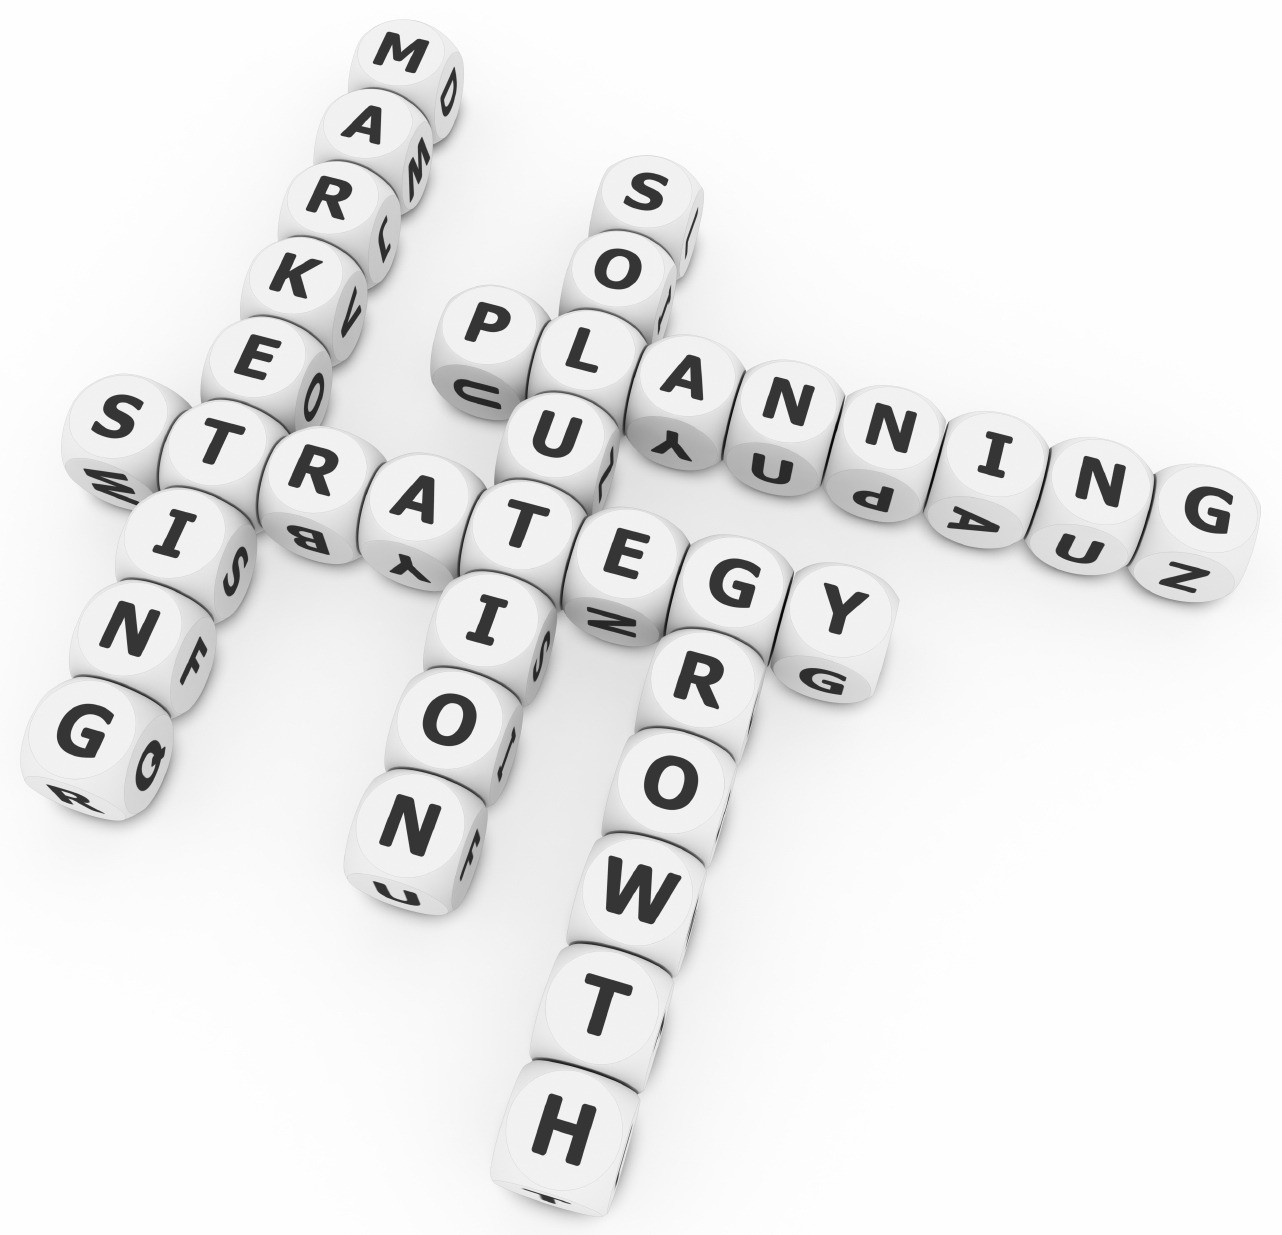 An image of a puzzle viewed from above with dice making up words relating to marketing activities.